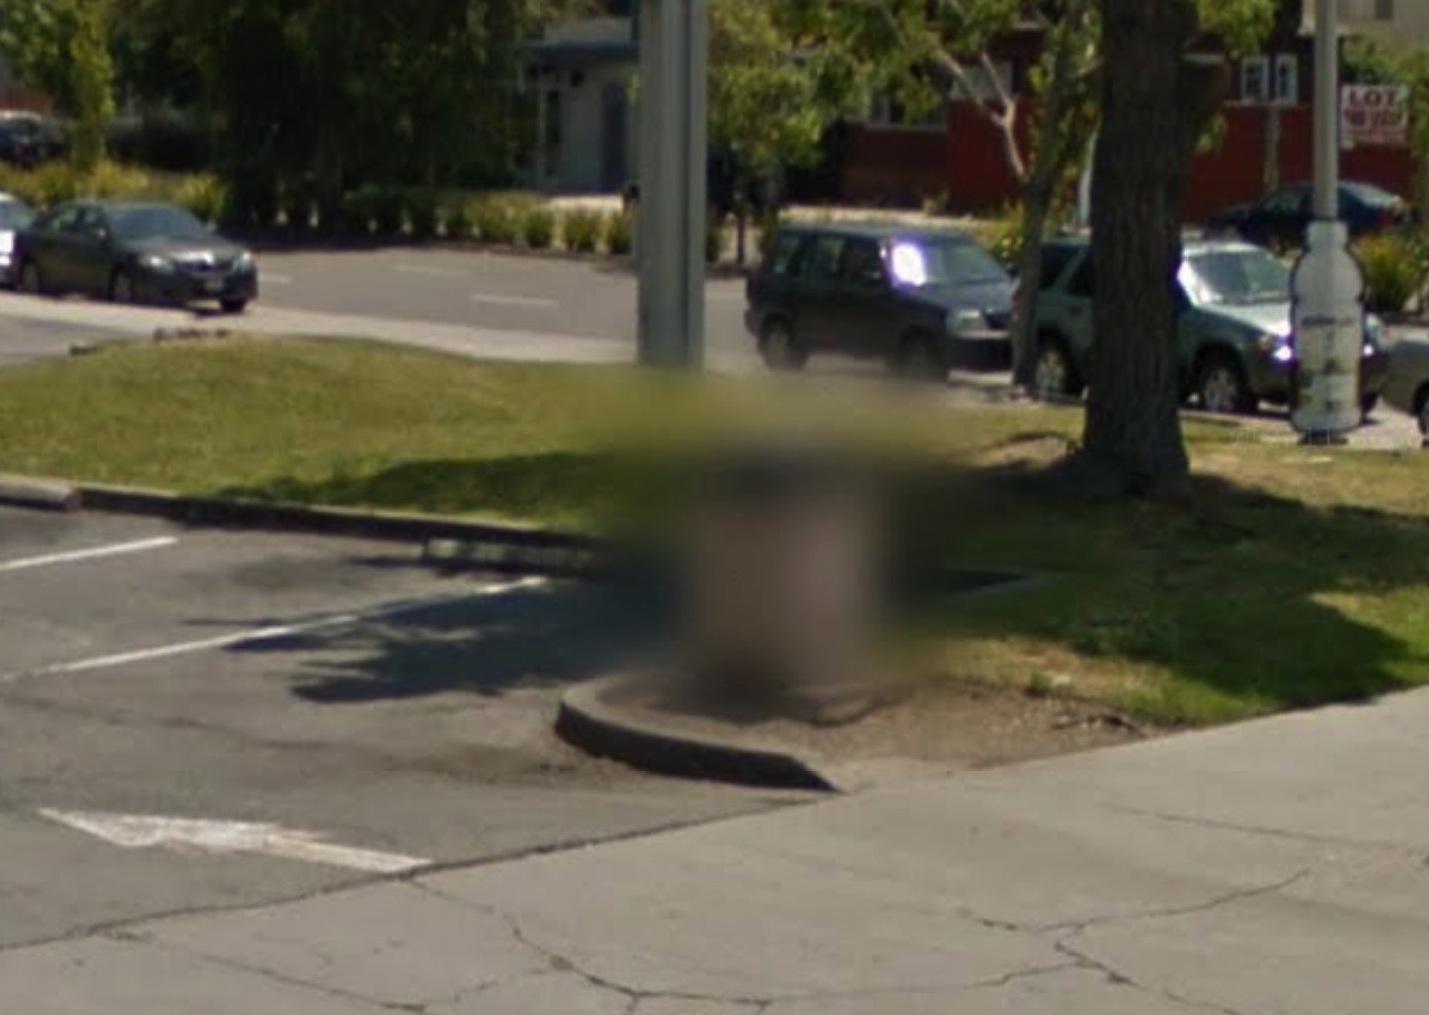 Blurred out trashcan from Google street view